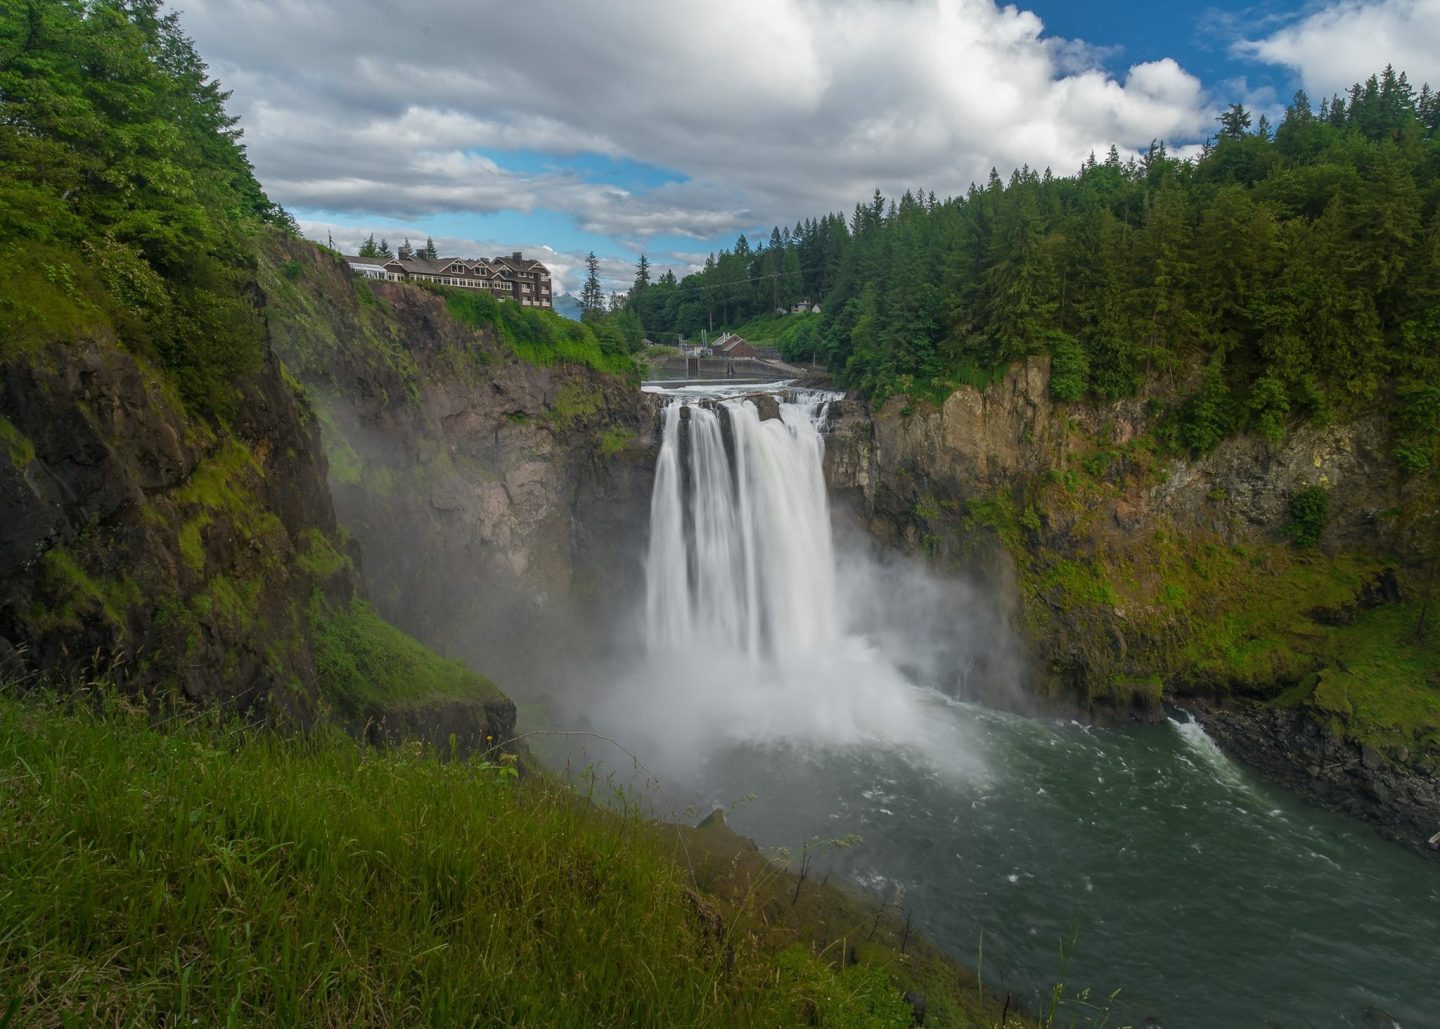 Snoqualmie Falls creates a lot of mist that is especially interesting to watch from the base of the falls.